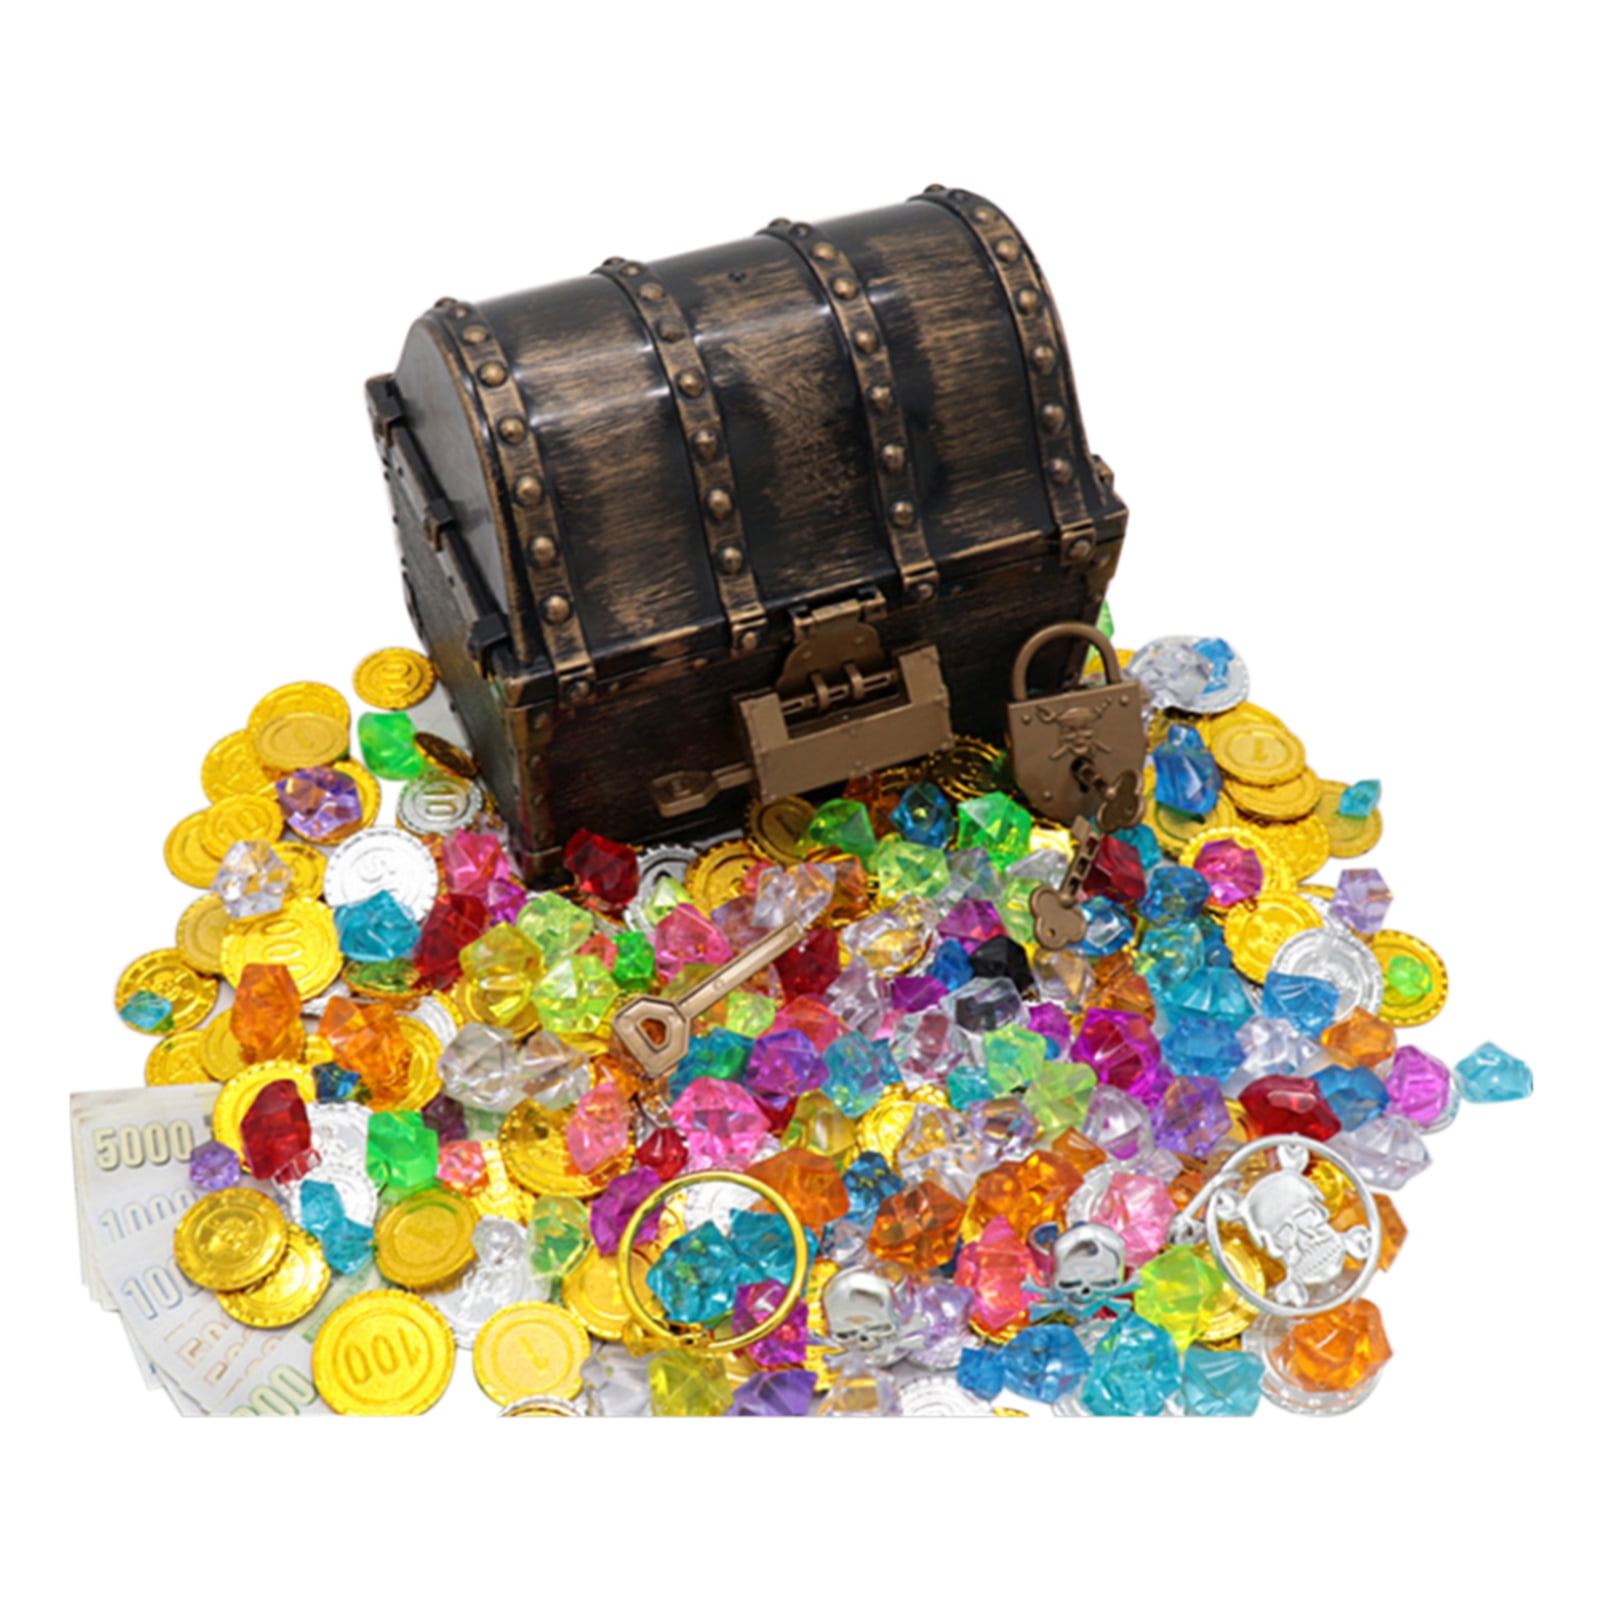 Pirate Treasure Chest Storage and Decorative Box for Kids Room Toys C 